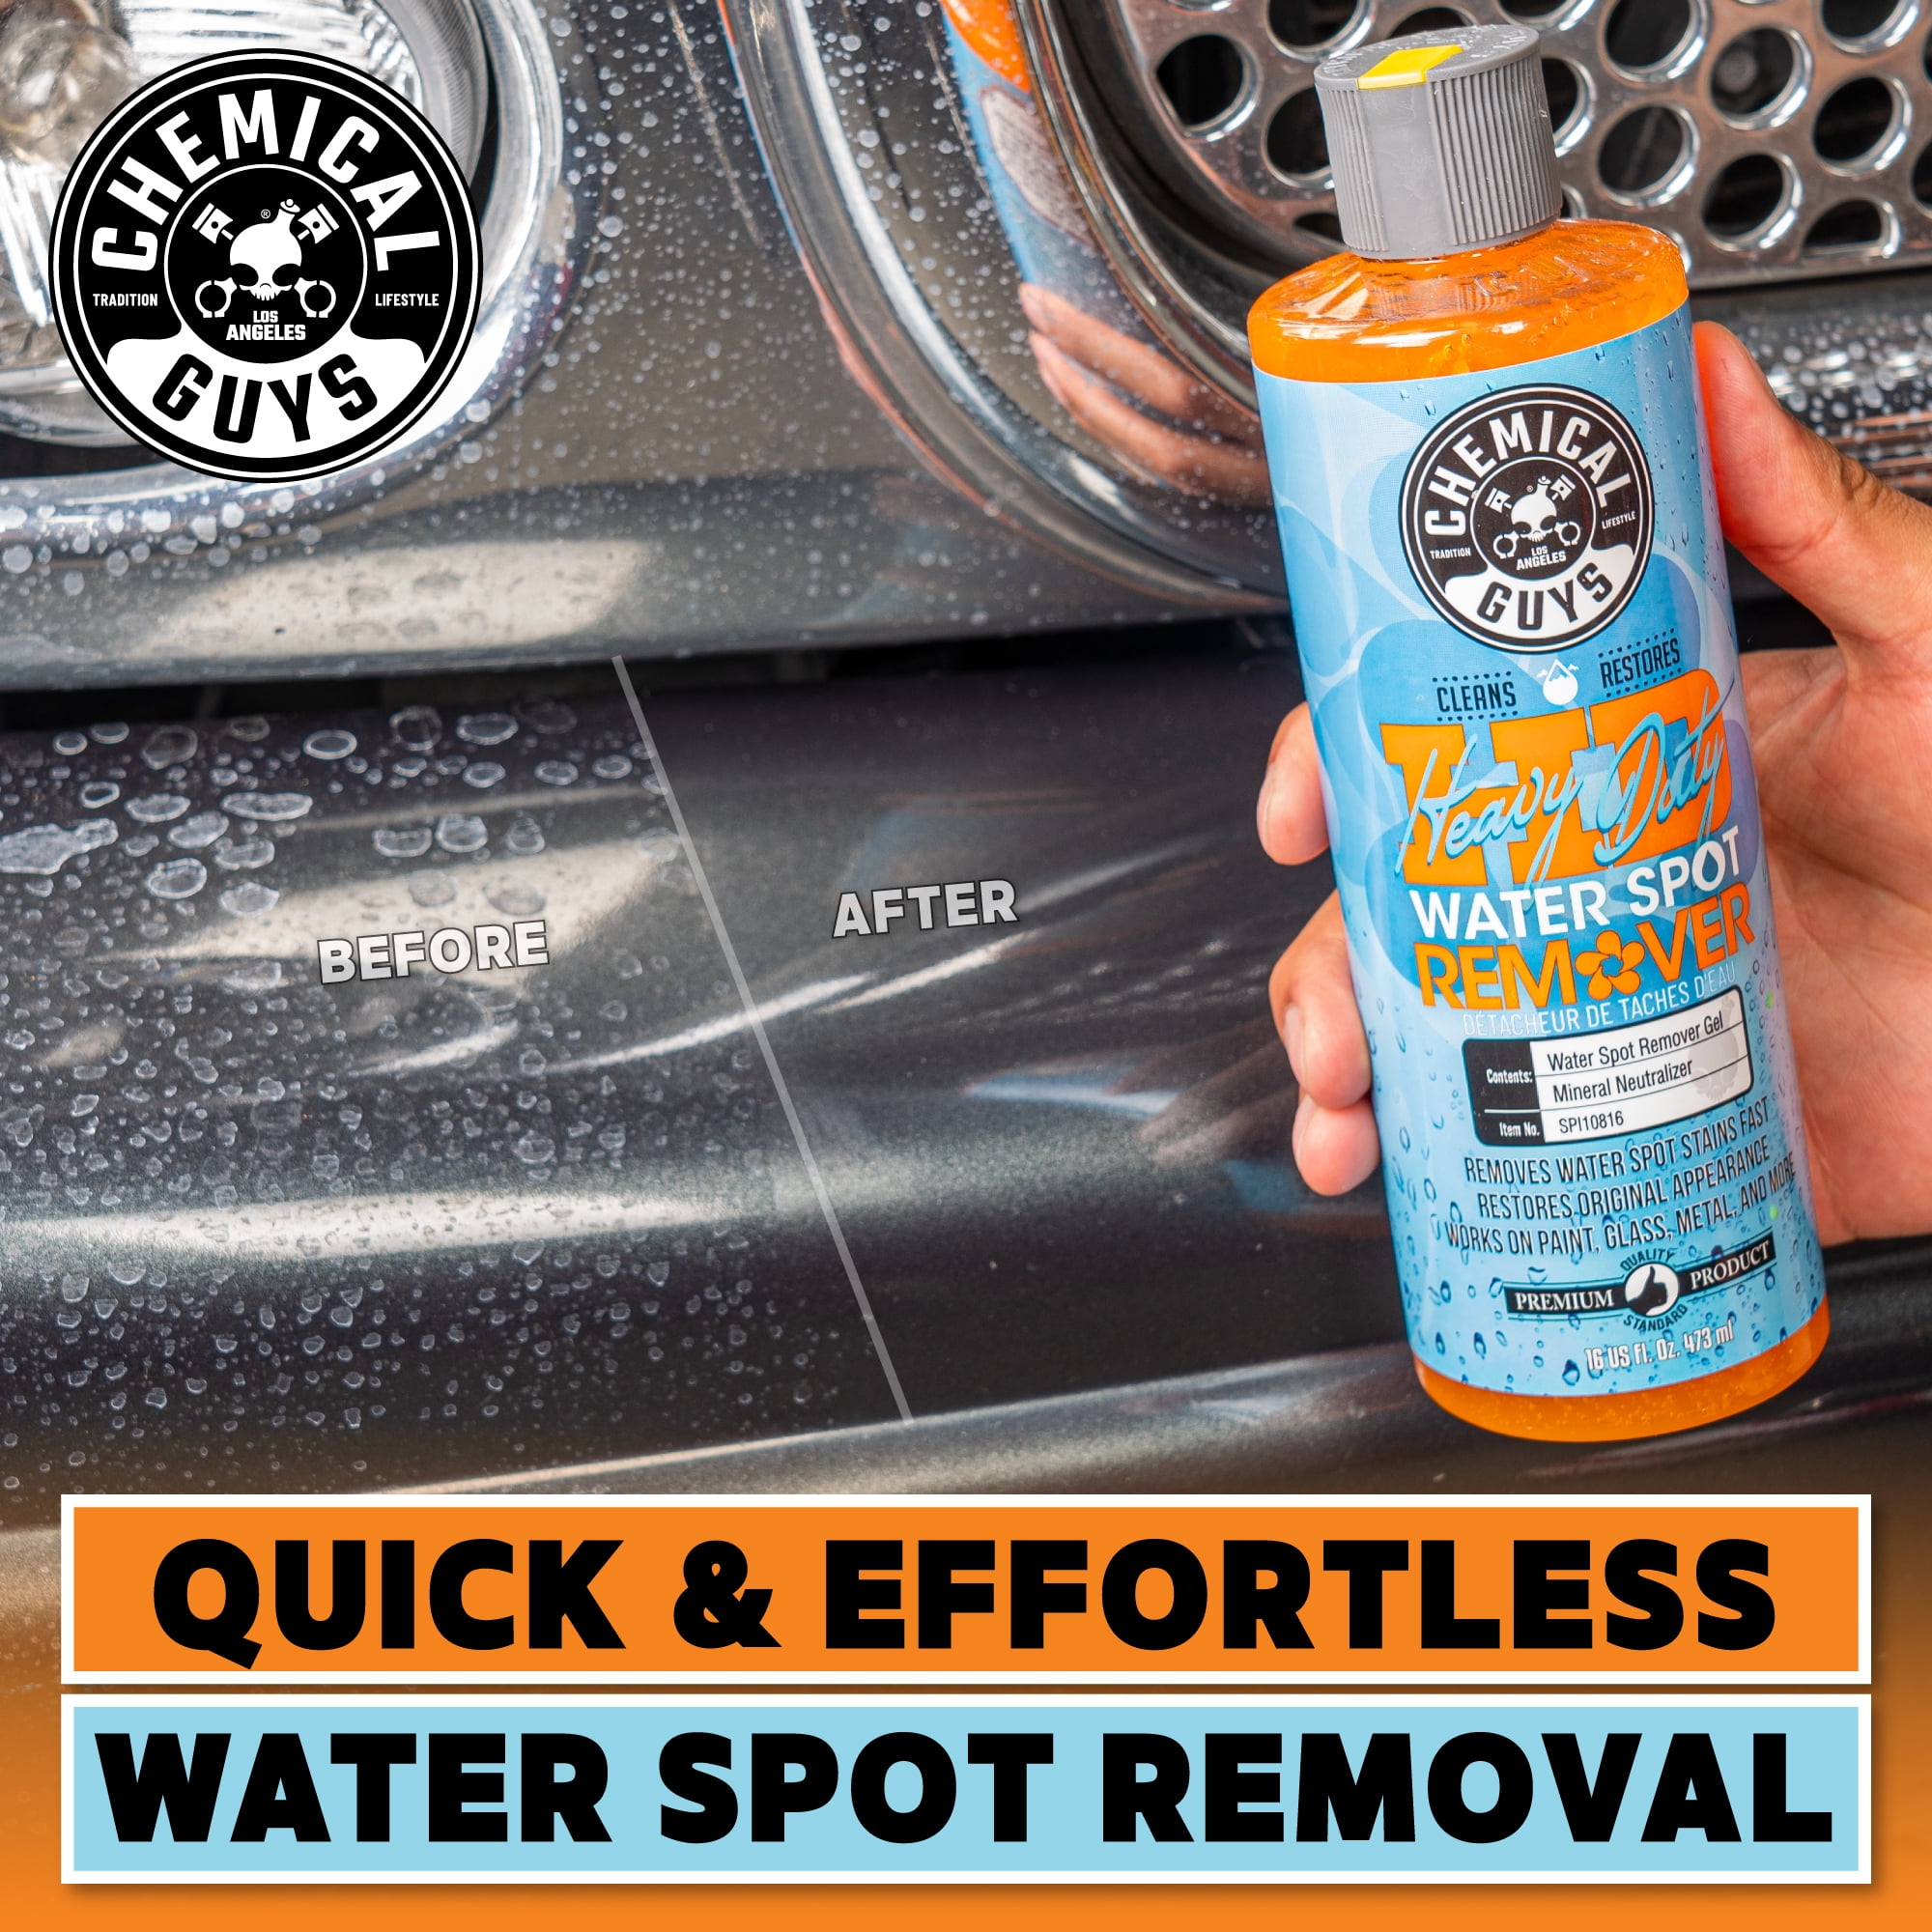 Chemical Guys SPI10816 Heavy Duty Water Spot Remover, 16oz